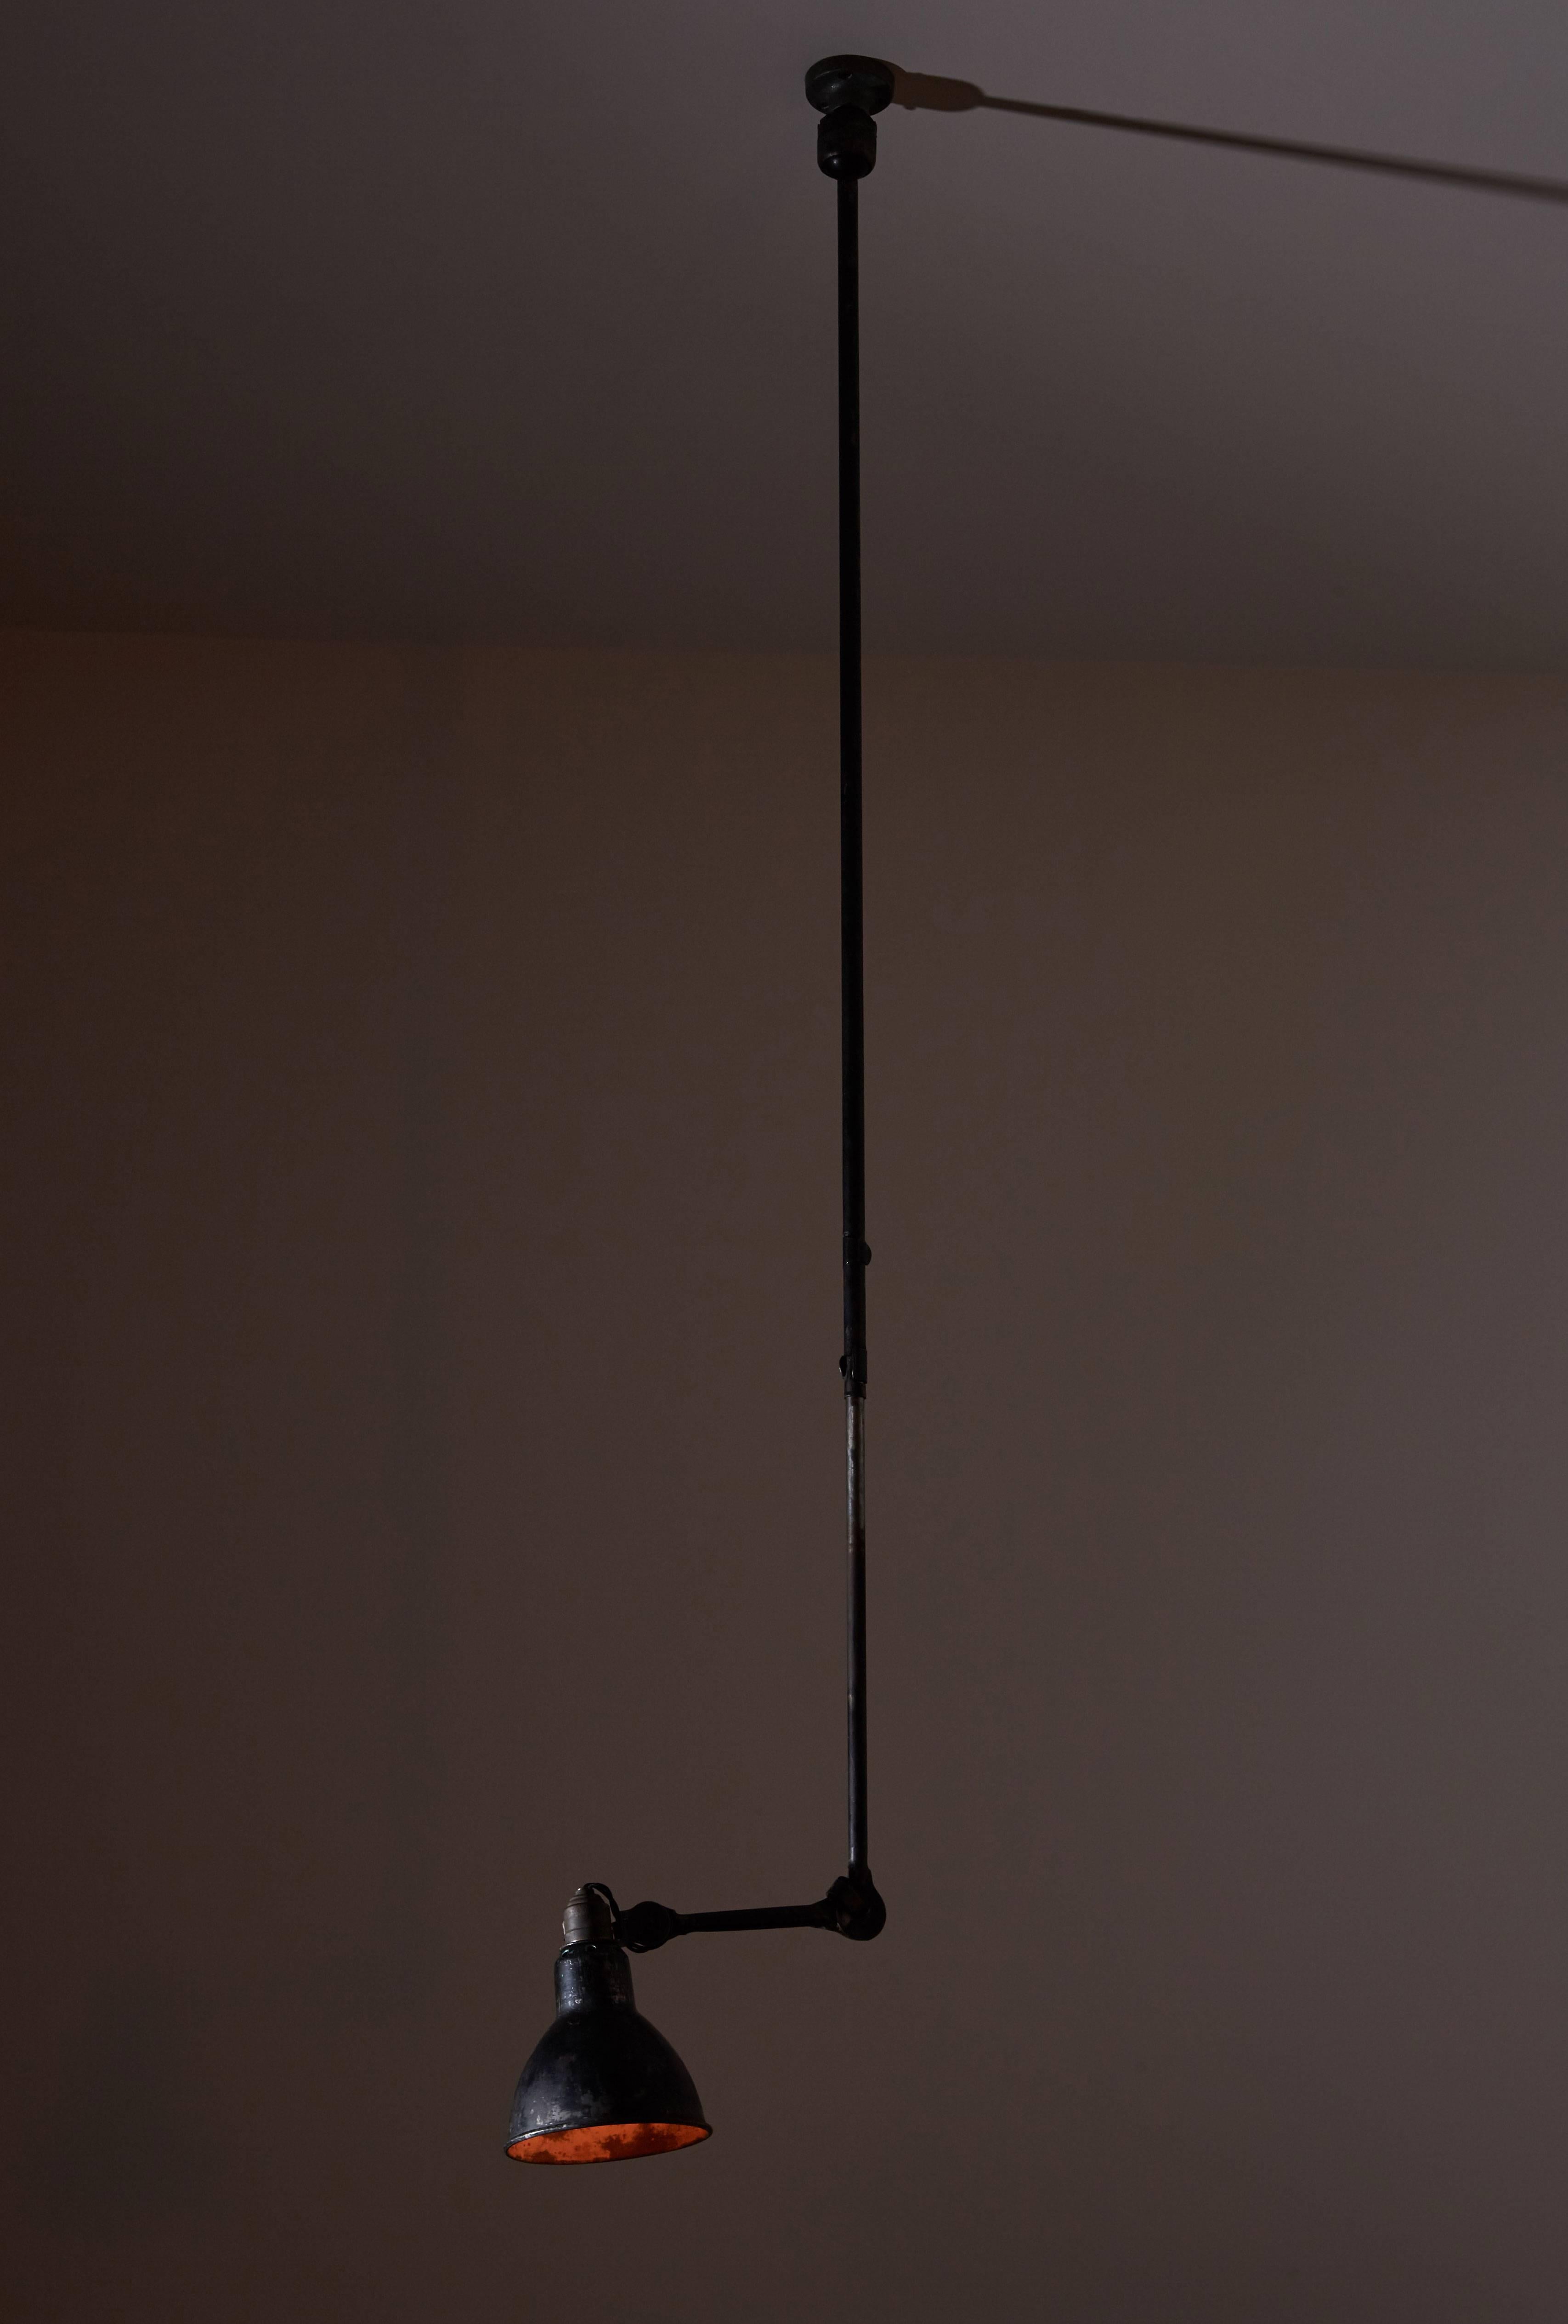 Model No. 302 adjustable ceiling light designed by Bernard Albin Gras for Gras Ravel in France, 1922. Painted steel. Original patina. Shade articulates by use of a ball pivot joint. Rewired for US junction boxes. Takes one 100w maximum bayonet bulb.